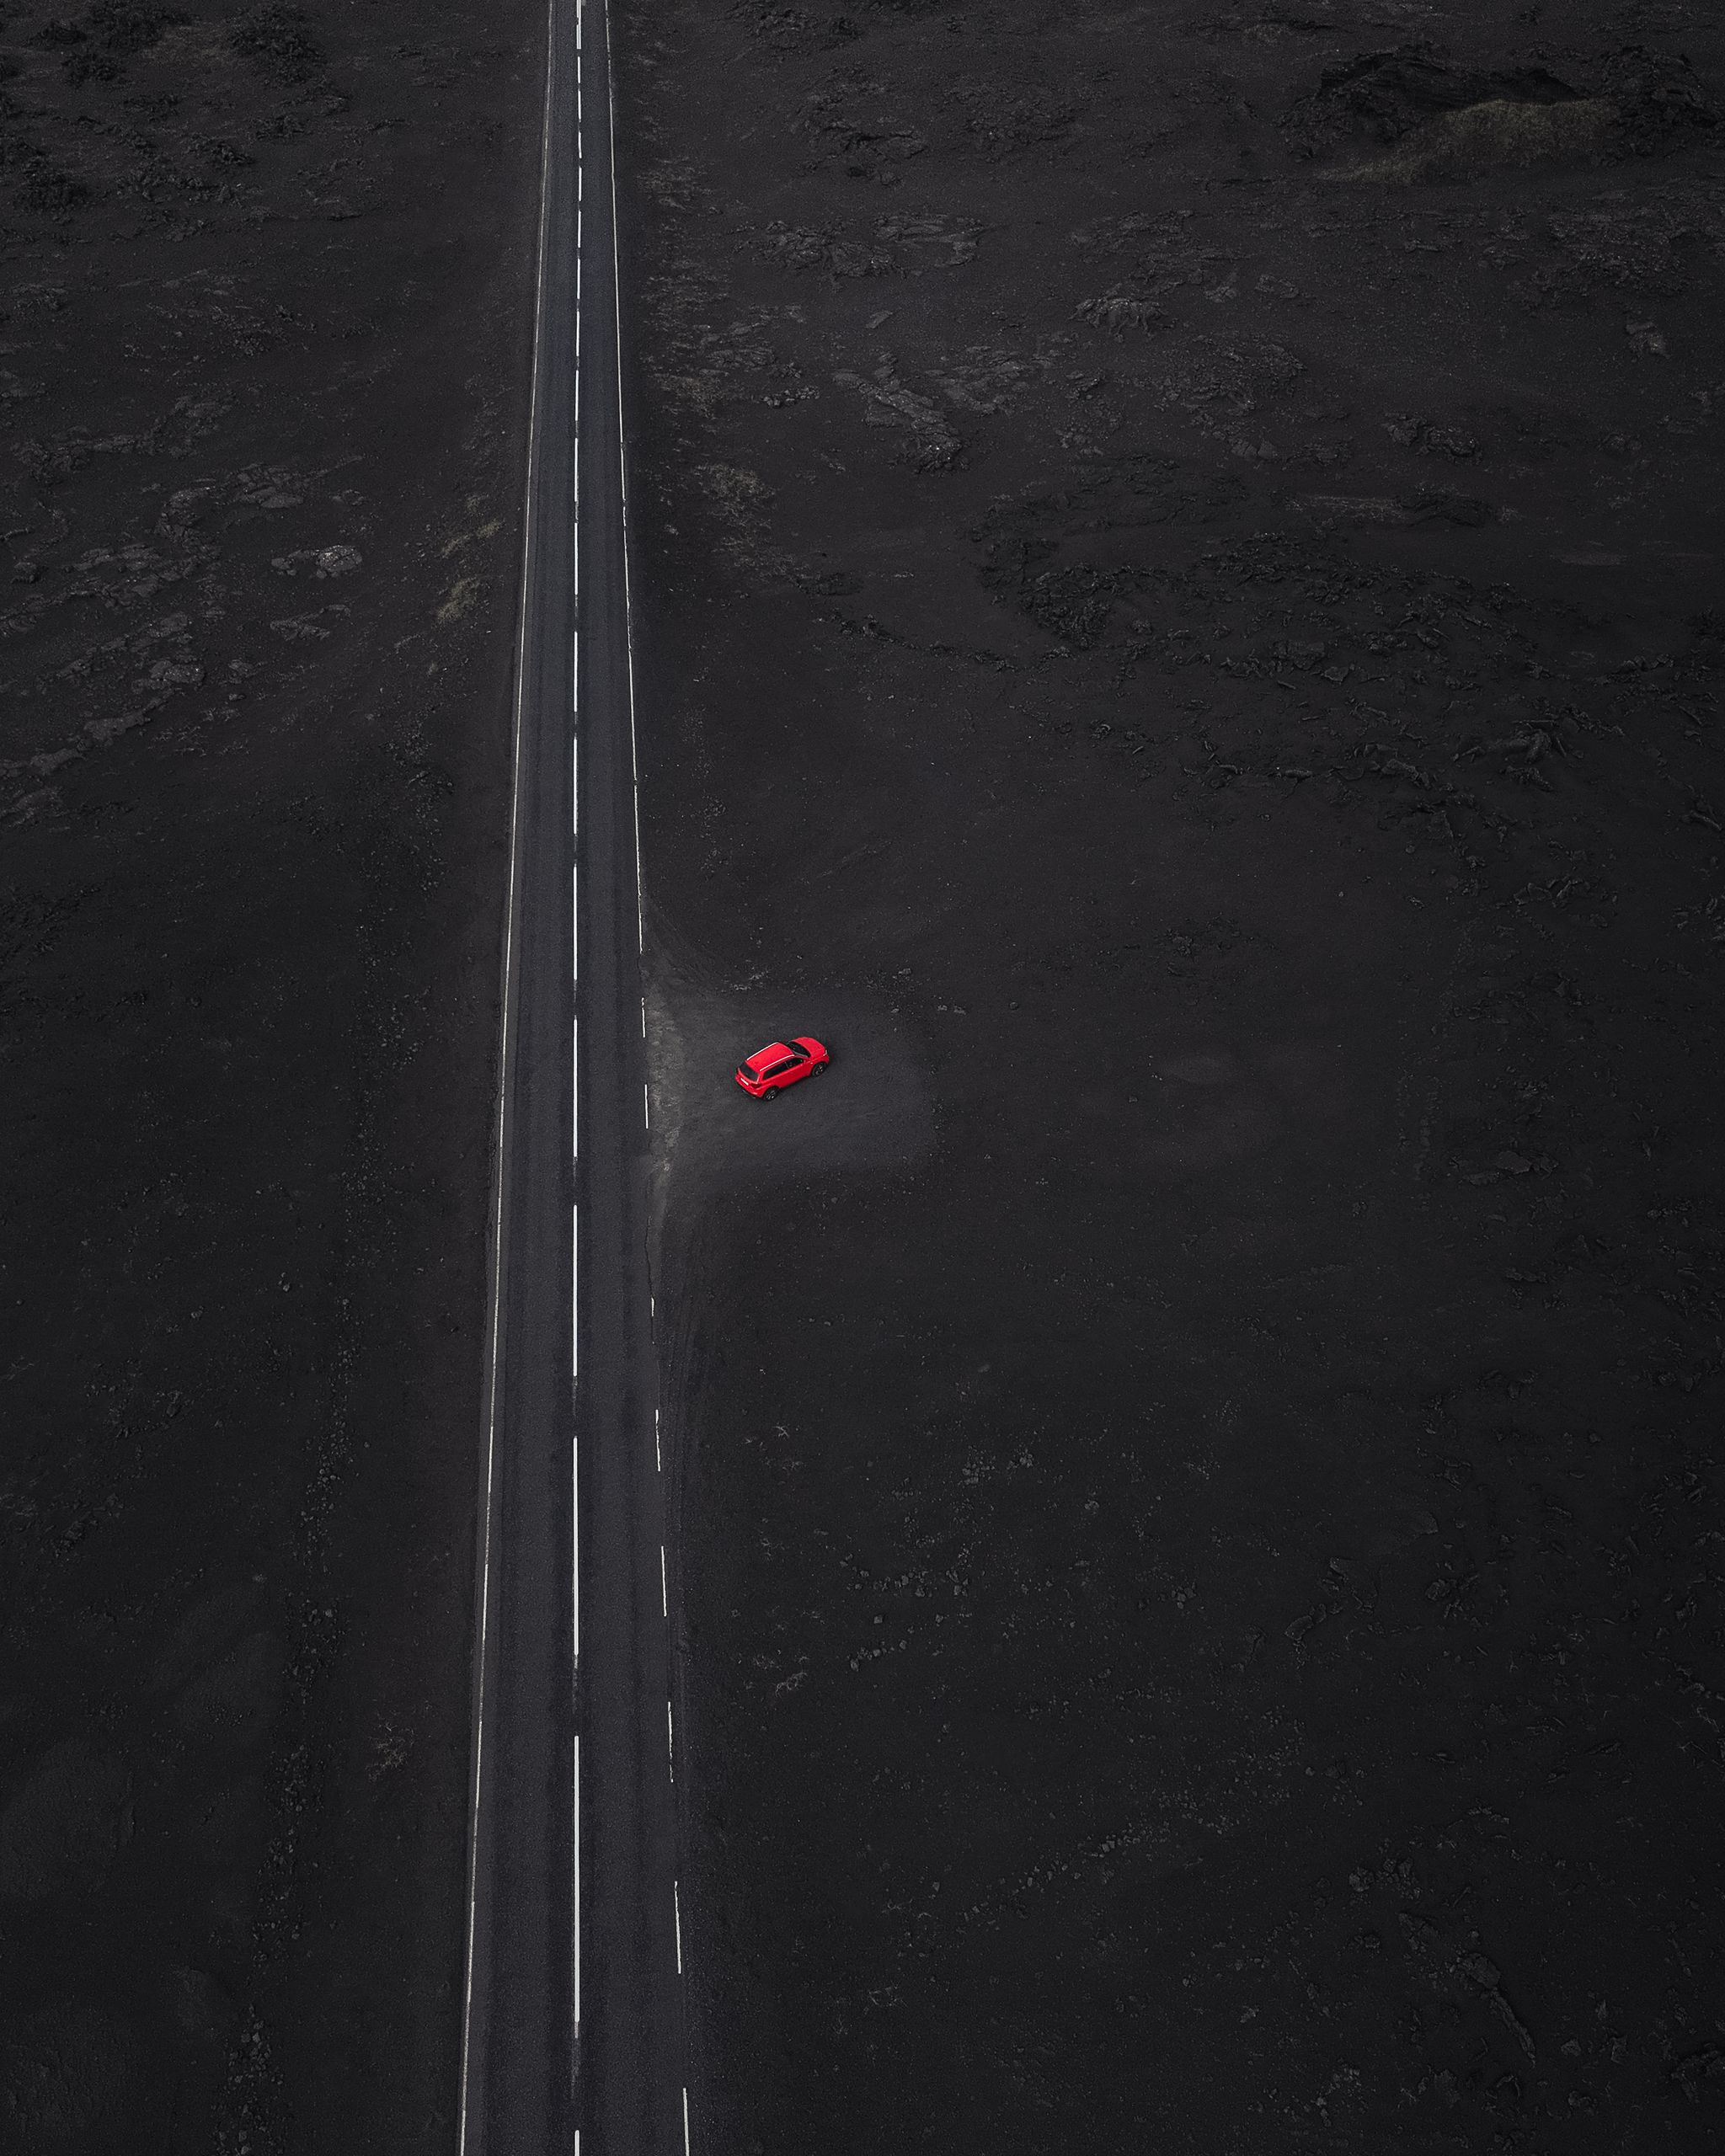 A red Vitara rental car parked close to a road with lava rocks around it